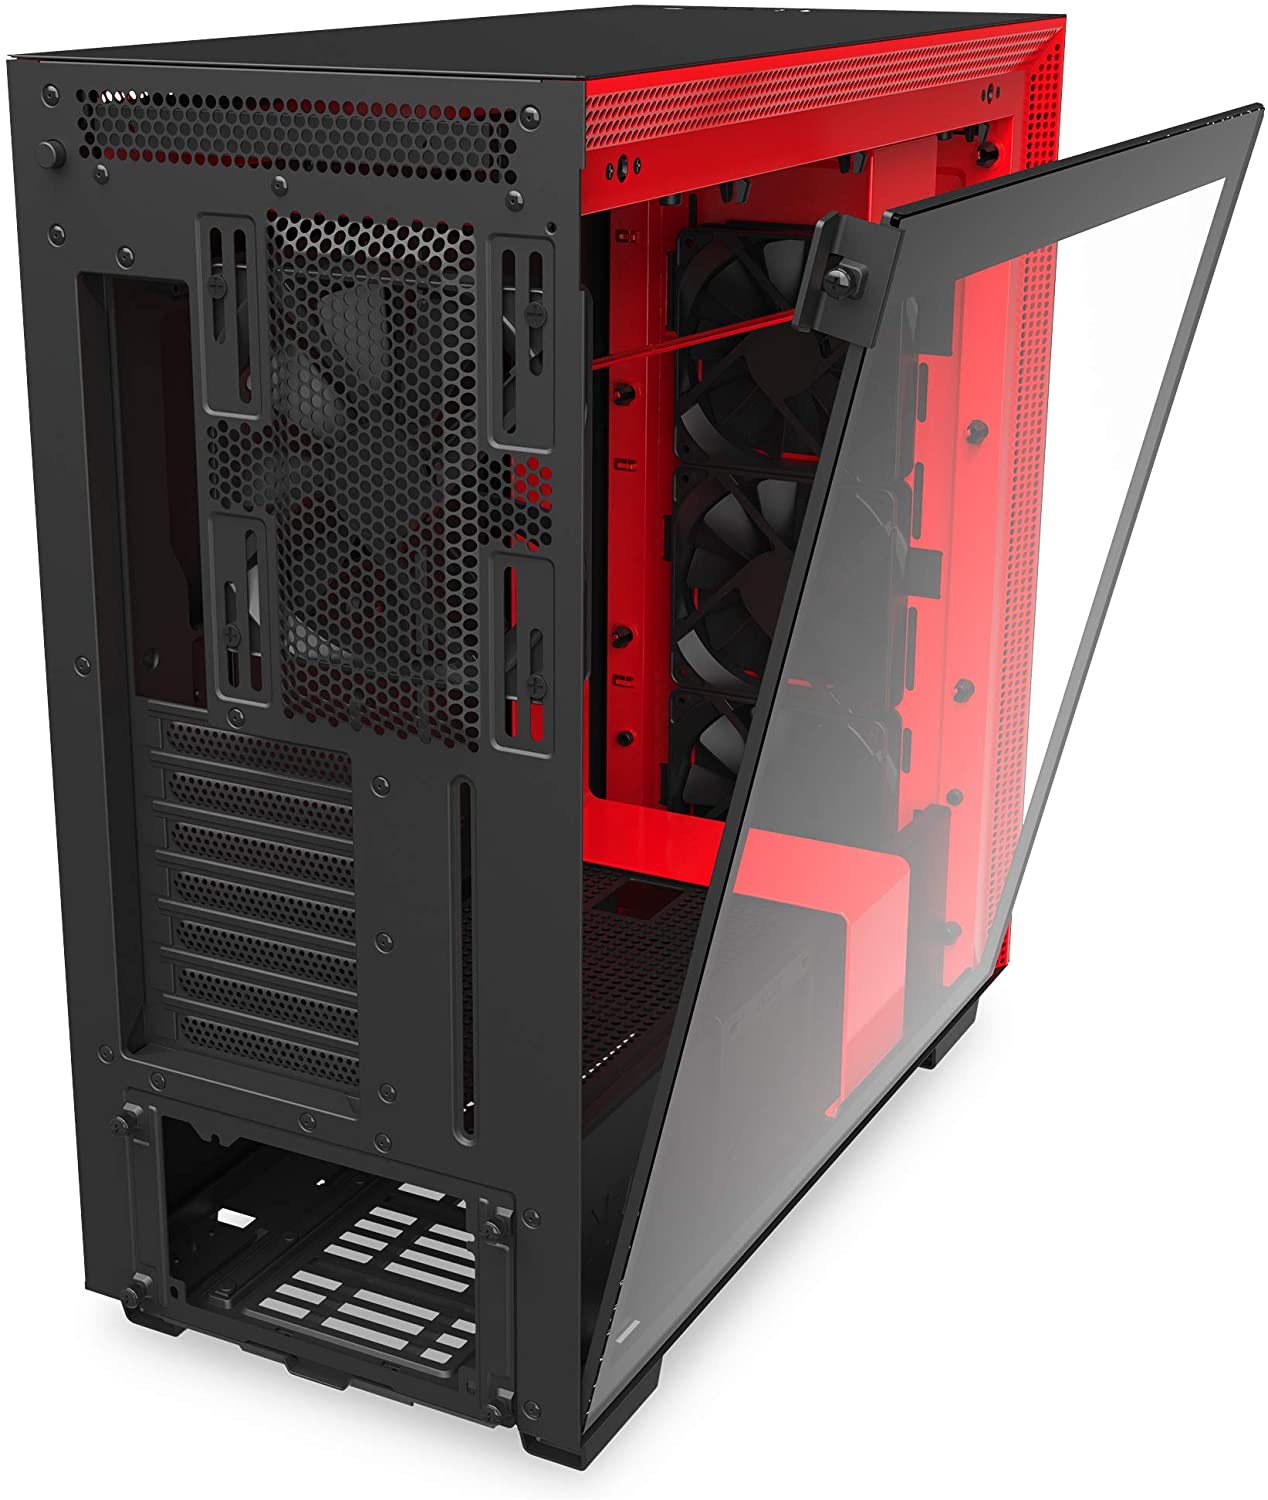 NZXT H710 Water-Cooling Ready Quick-Release Tempered Glass Side Panel Cable Management System Black/Red Steel Construction ATX Mid Tower PC Gaming Case Front I/O USB Type-C Port 